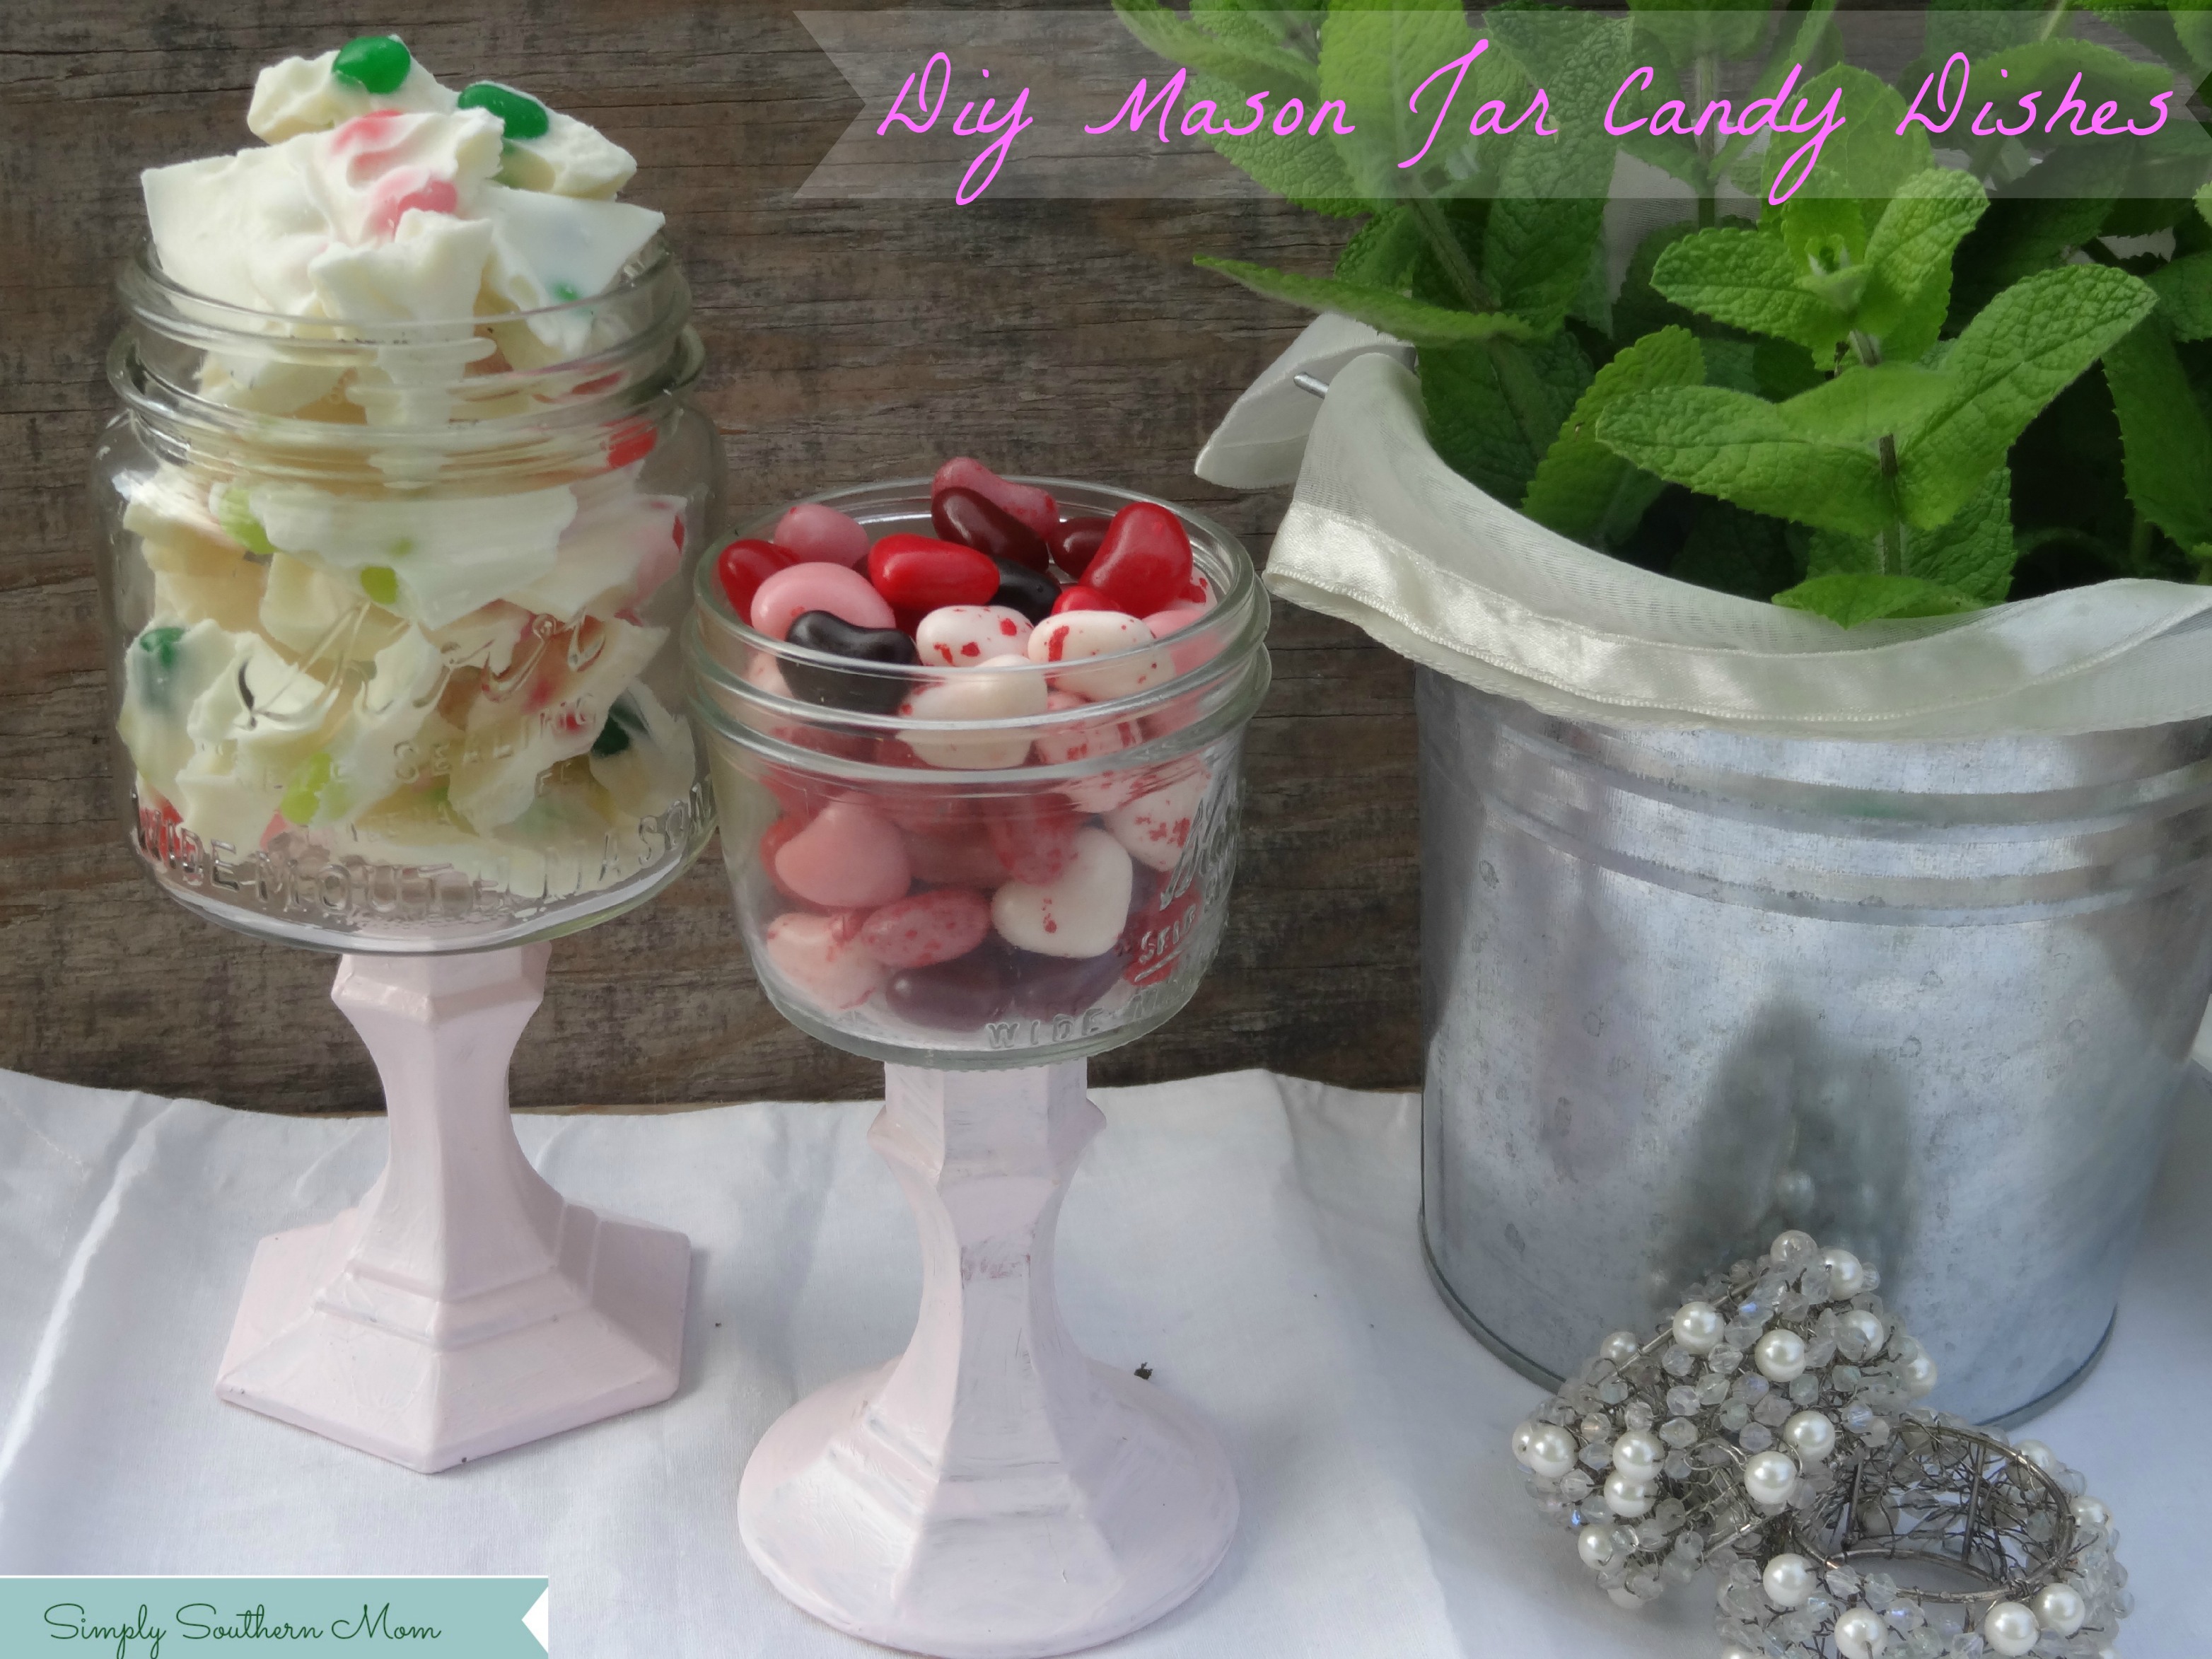 https://www.simplysouthernmom.com/wp-content/uploads/2014/06/DIY-Mason-Jar-Candy-Dishes-.jpg